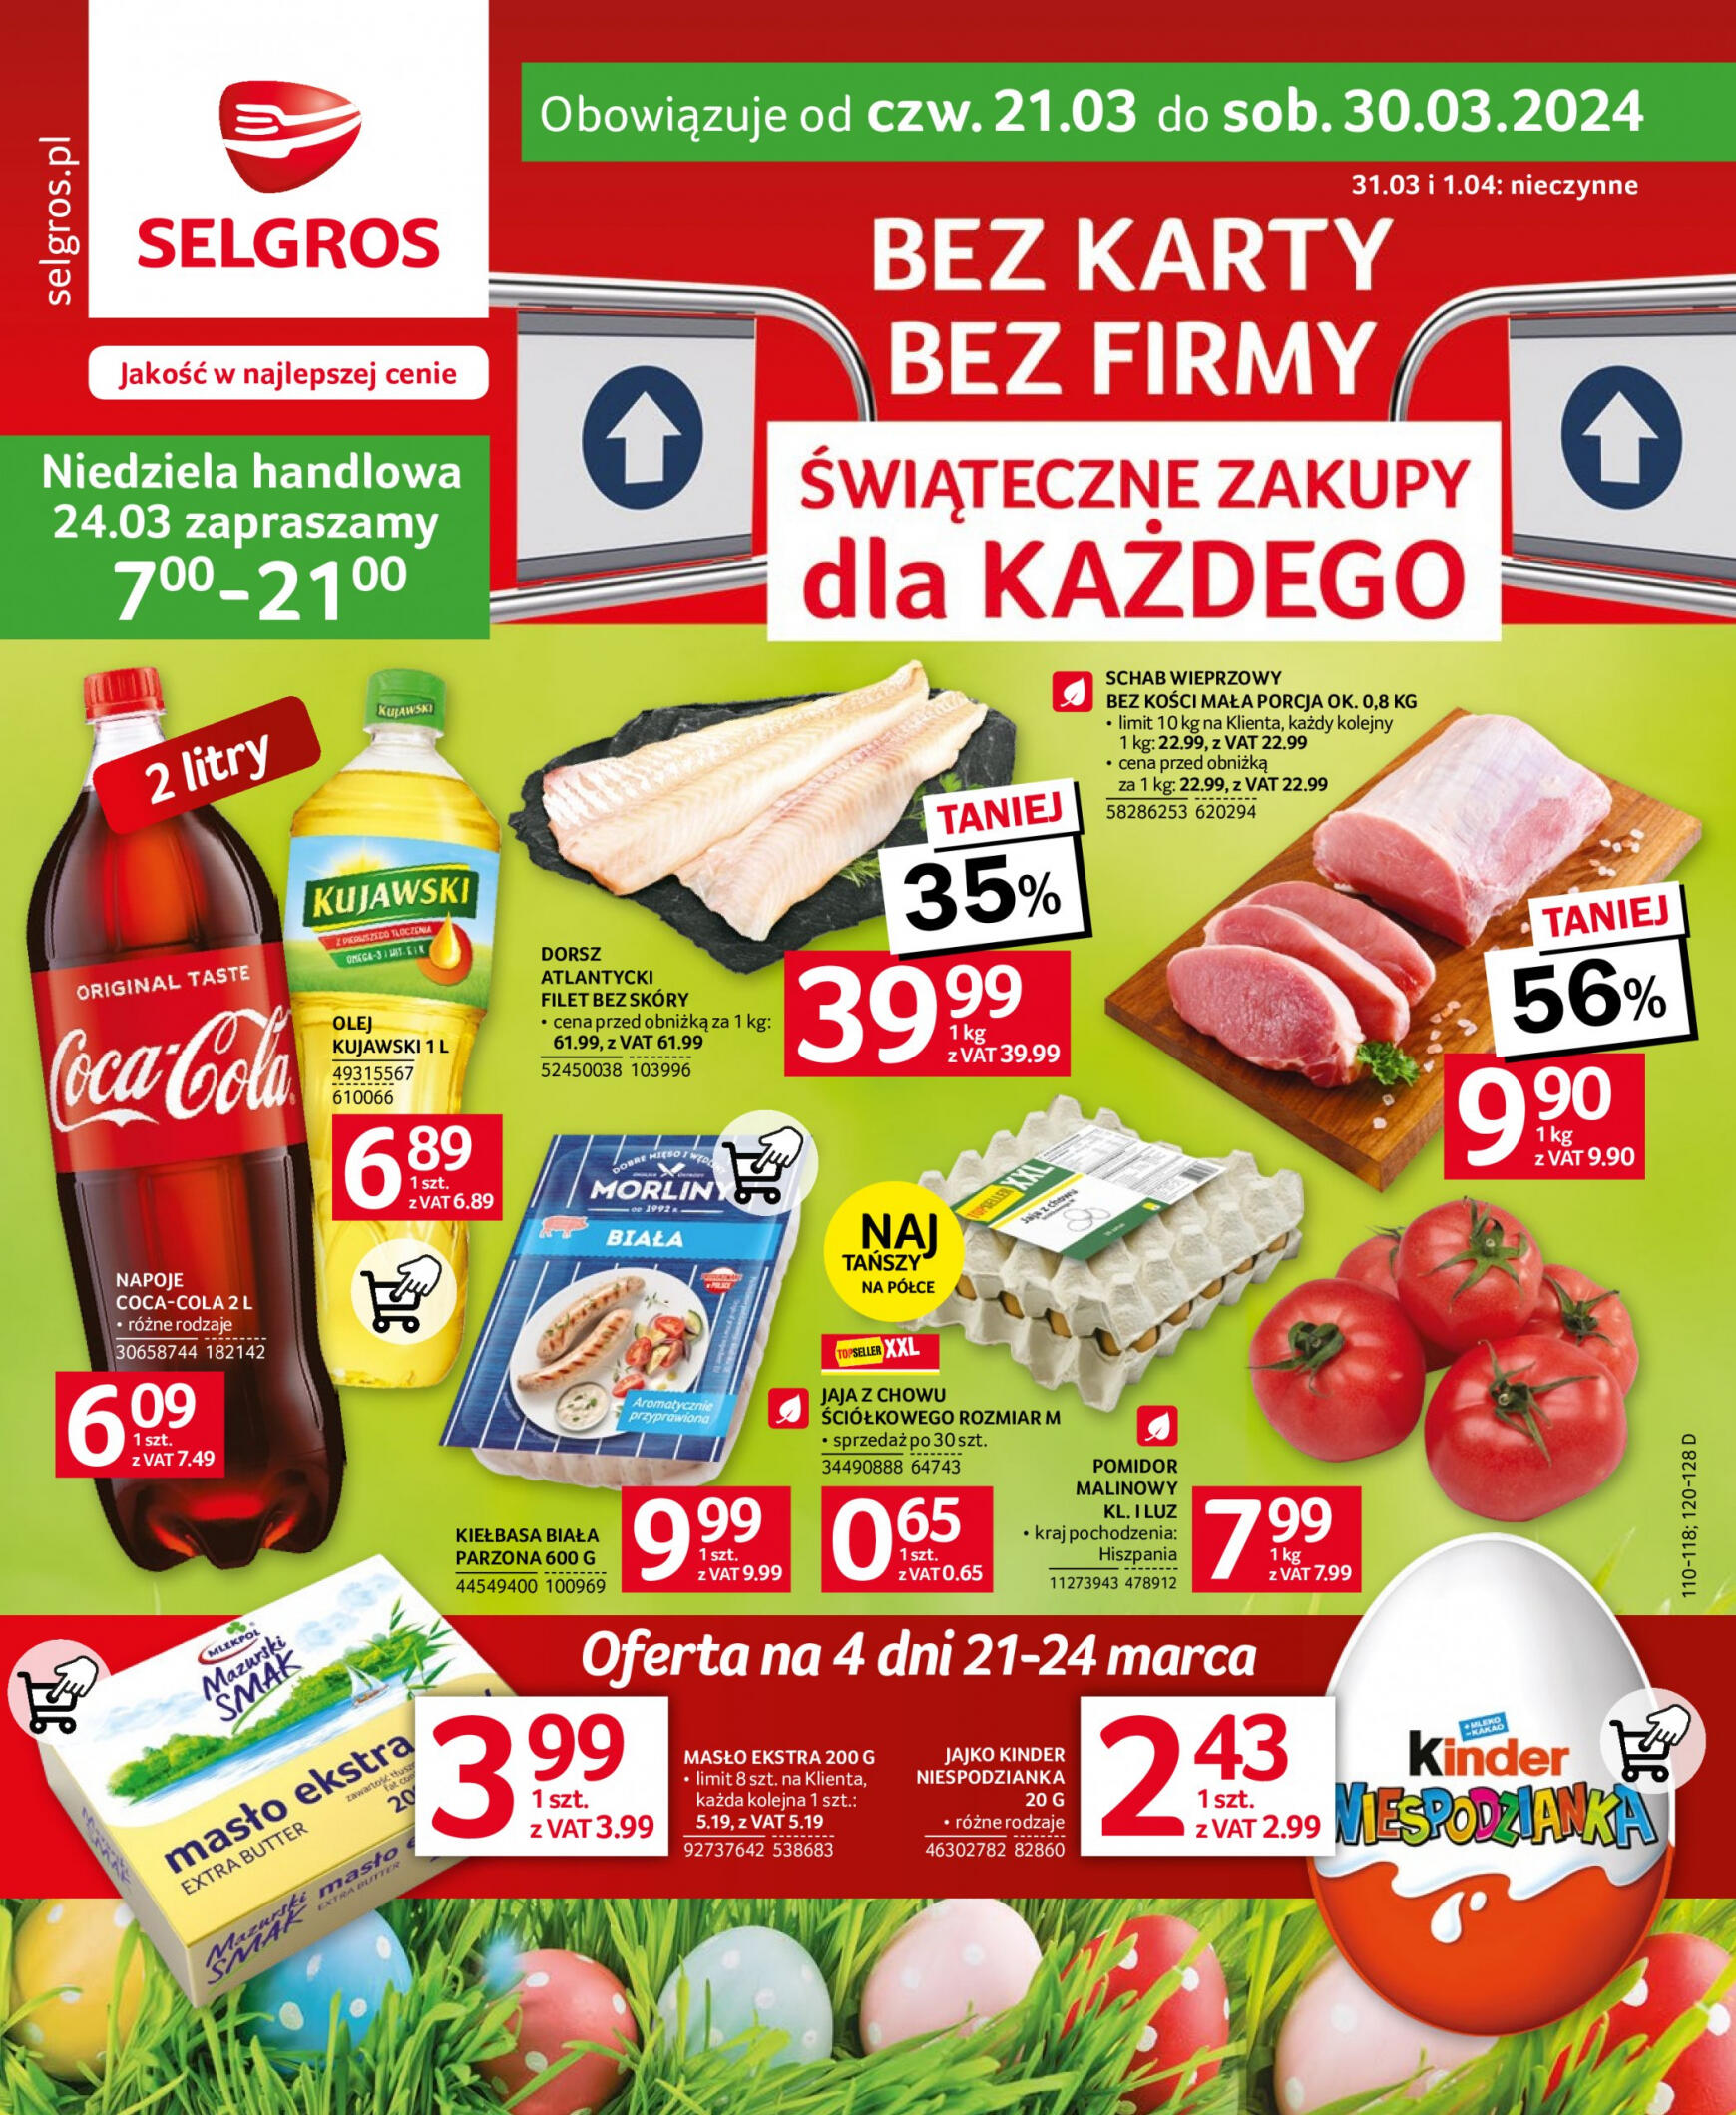 selgros - Selgros cash&carry - Selgros Food obowiązuje od 21.03.2024 - page: 1